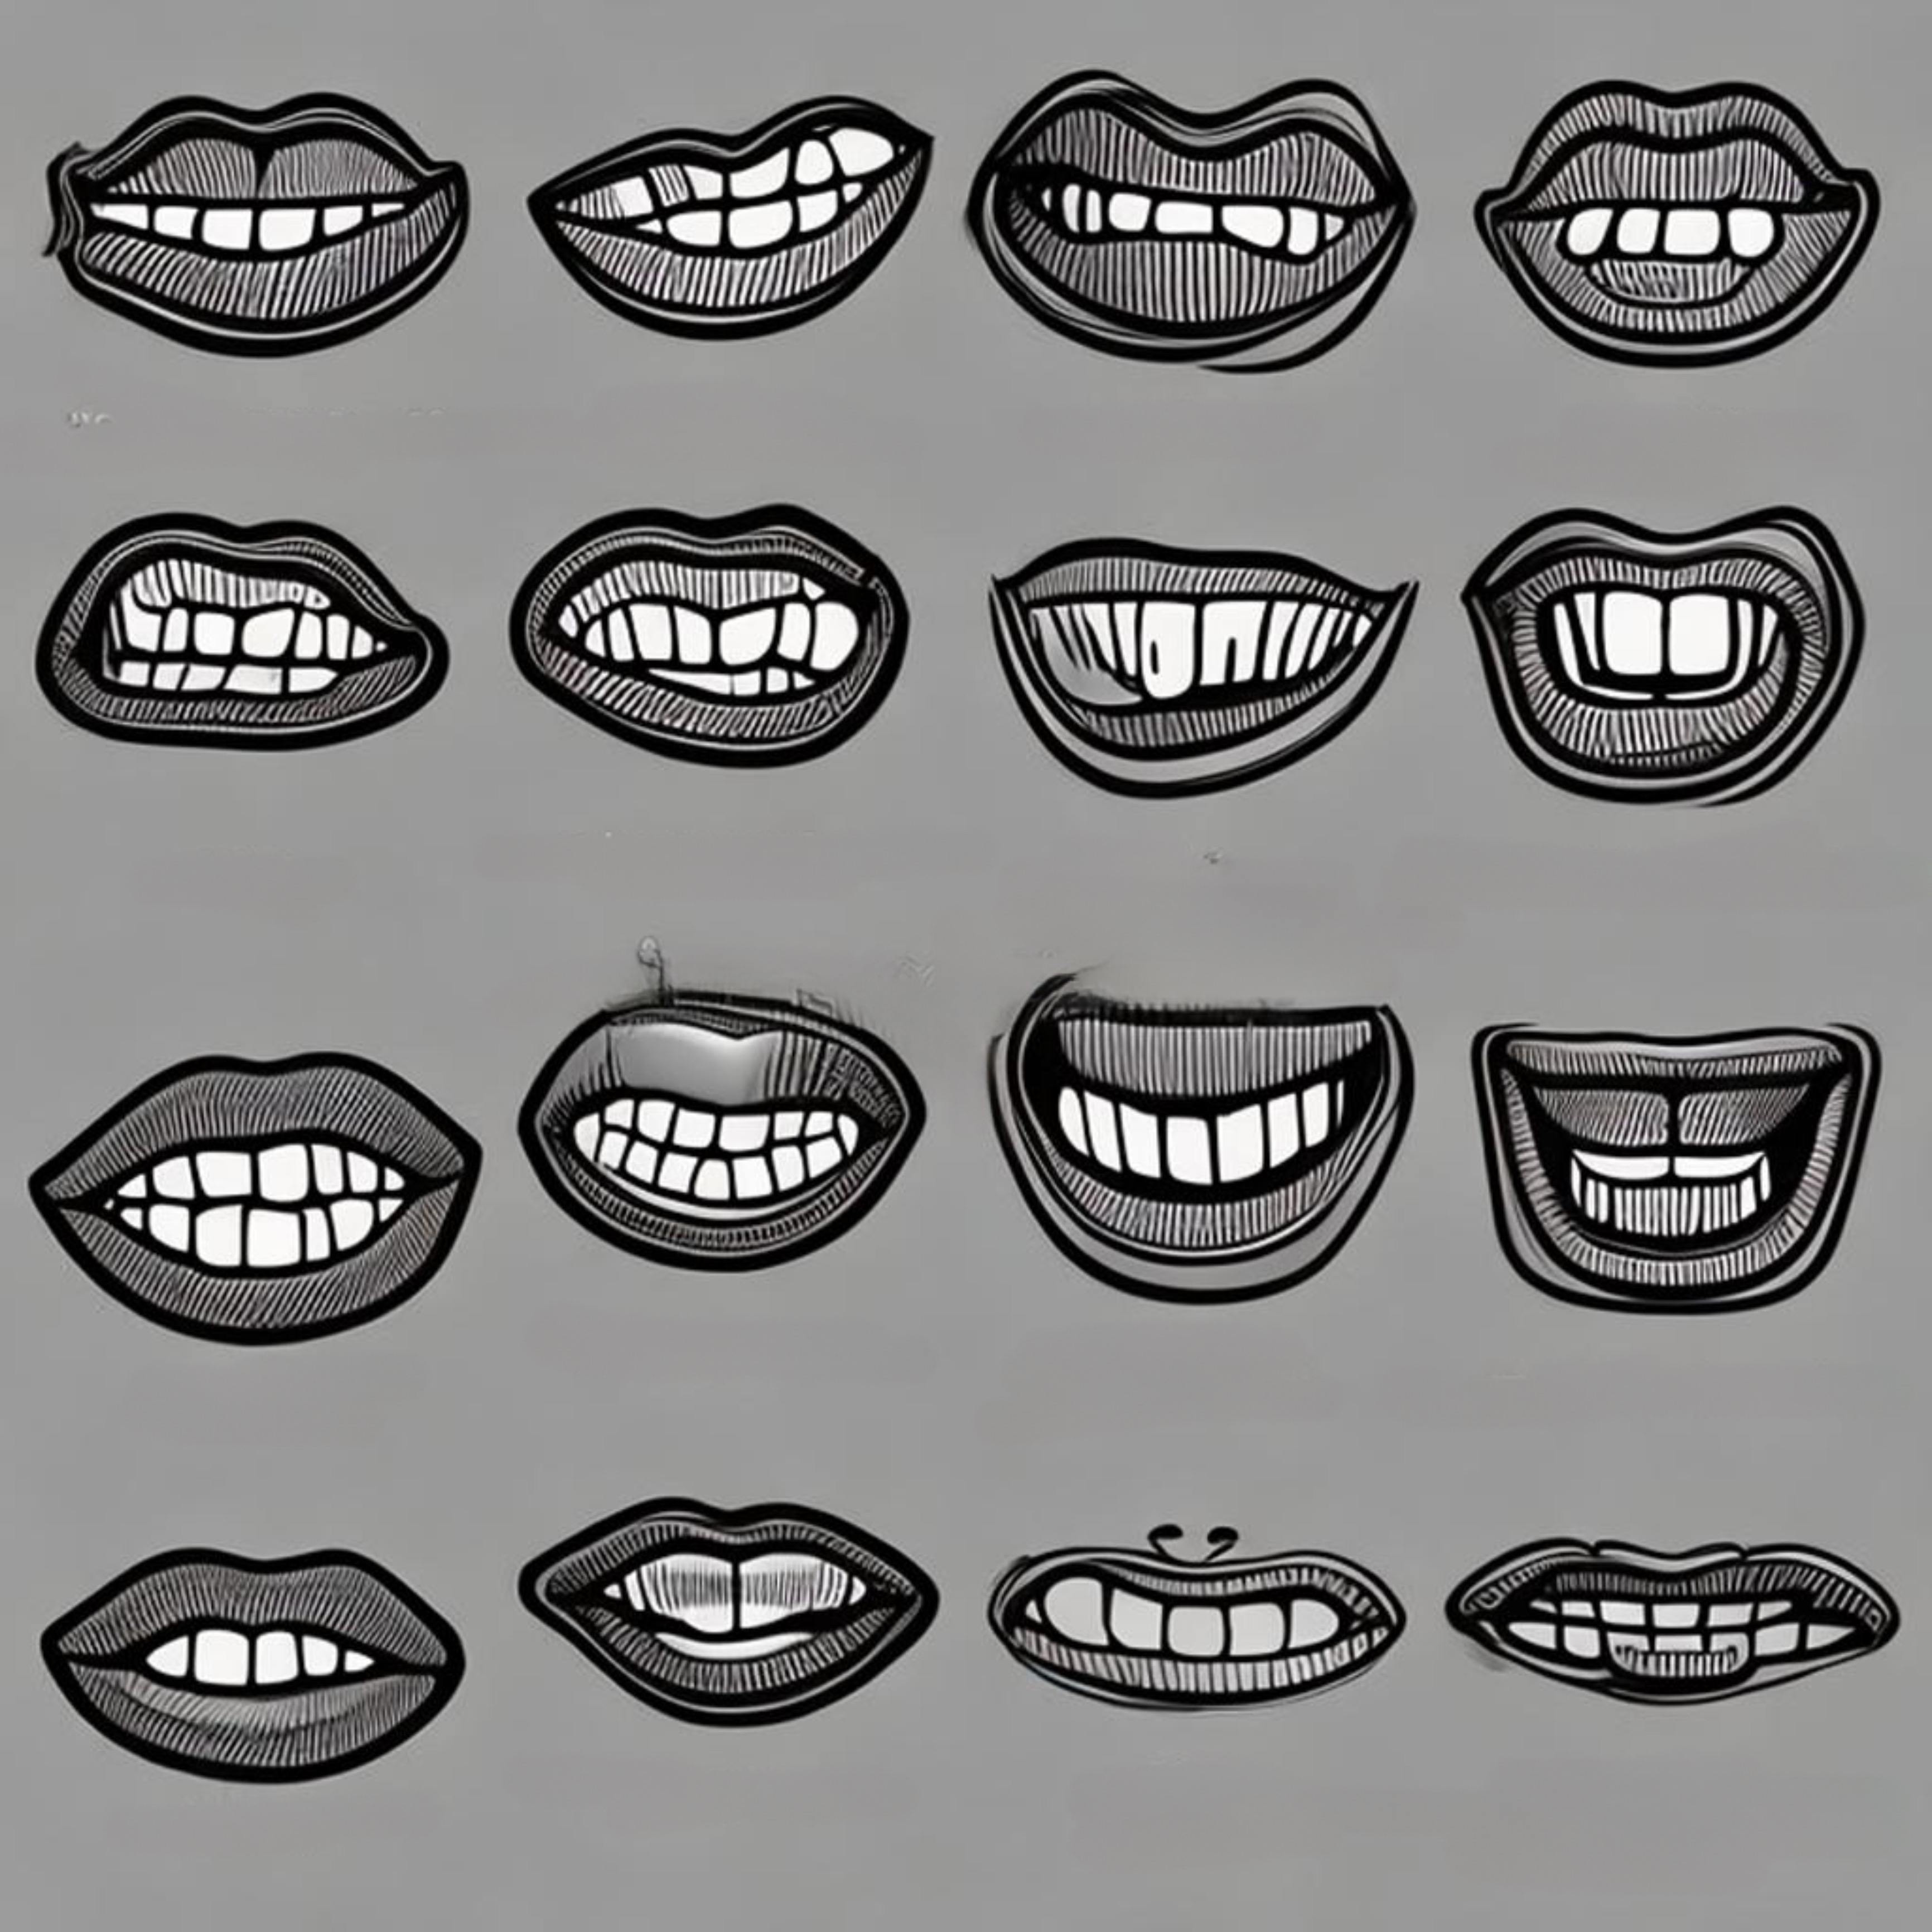 Types of mouth: thin, full, bow, straight, downward-turned, upturned, uneven, gummy smile.